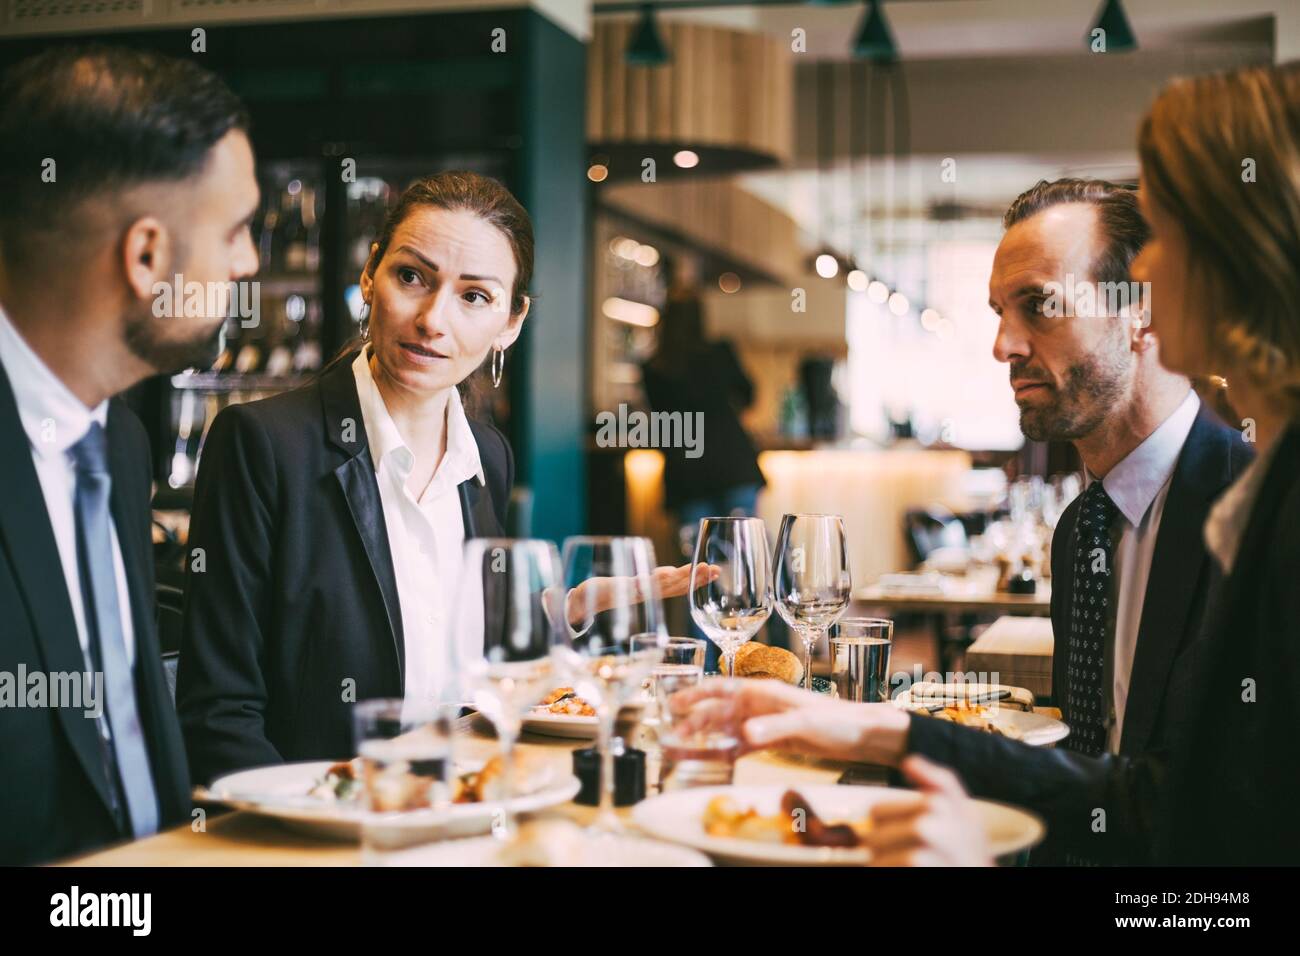 Business coworkers communicating at lunch in restaurant Stock Photo